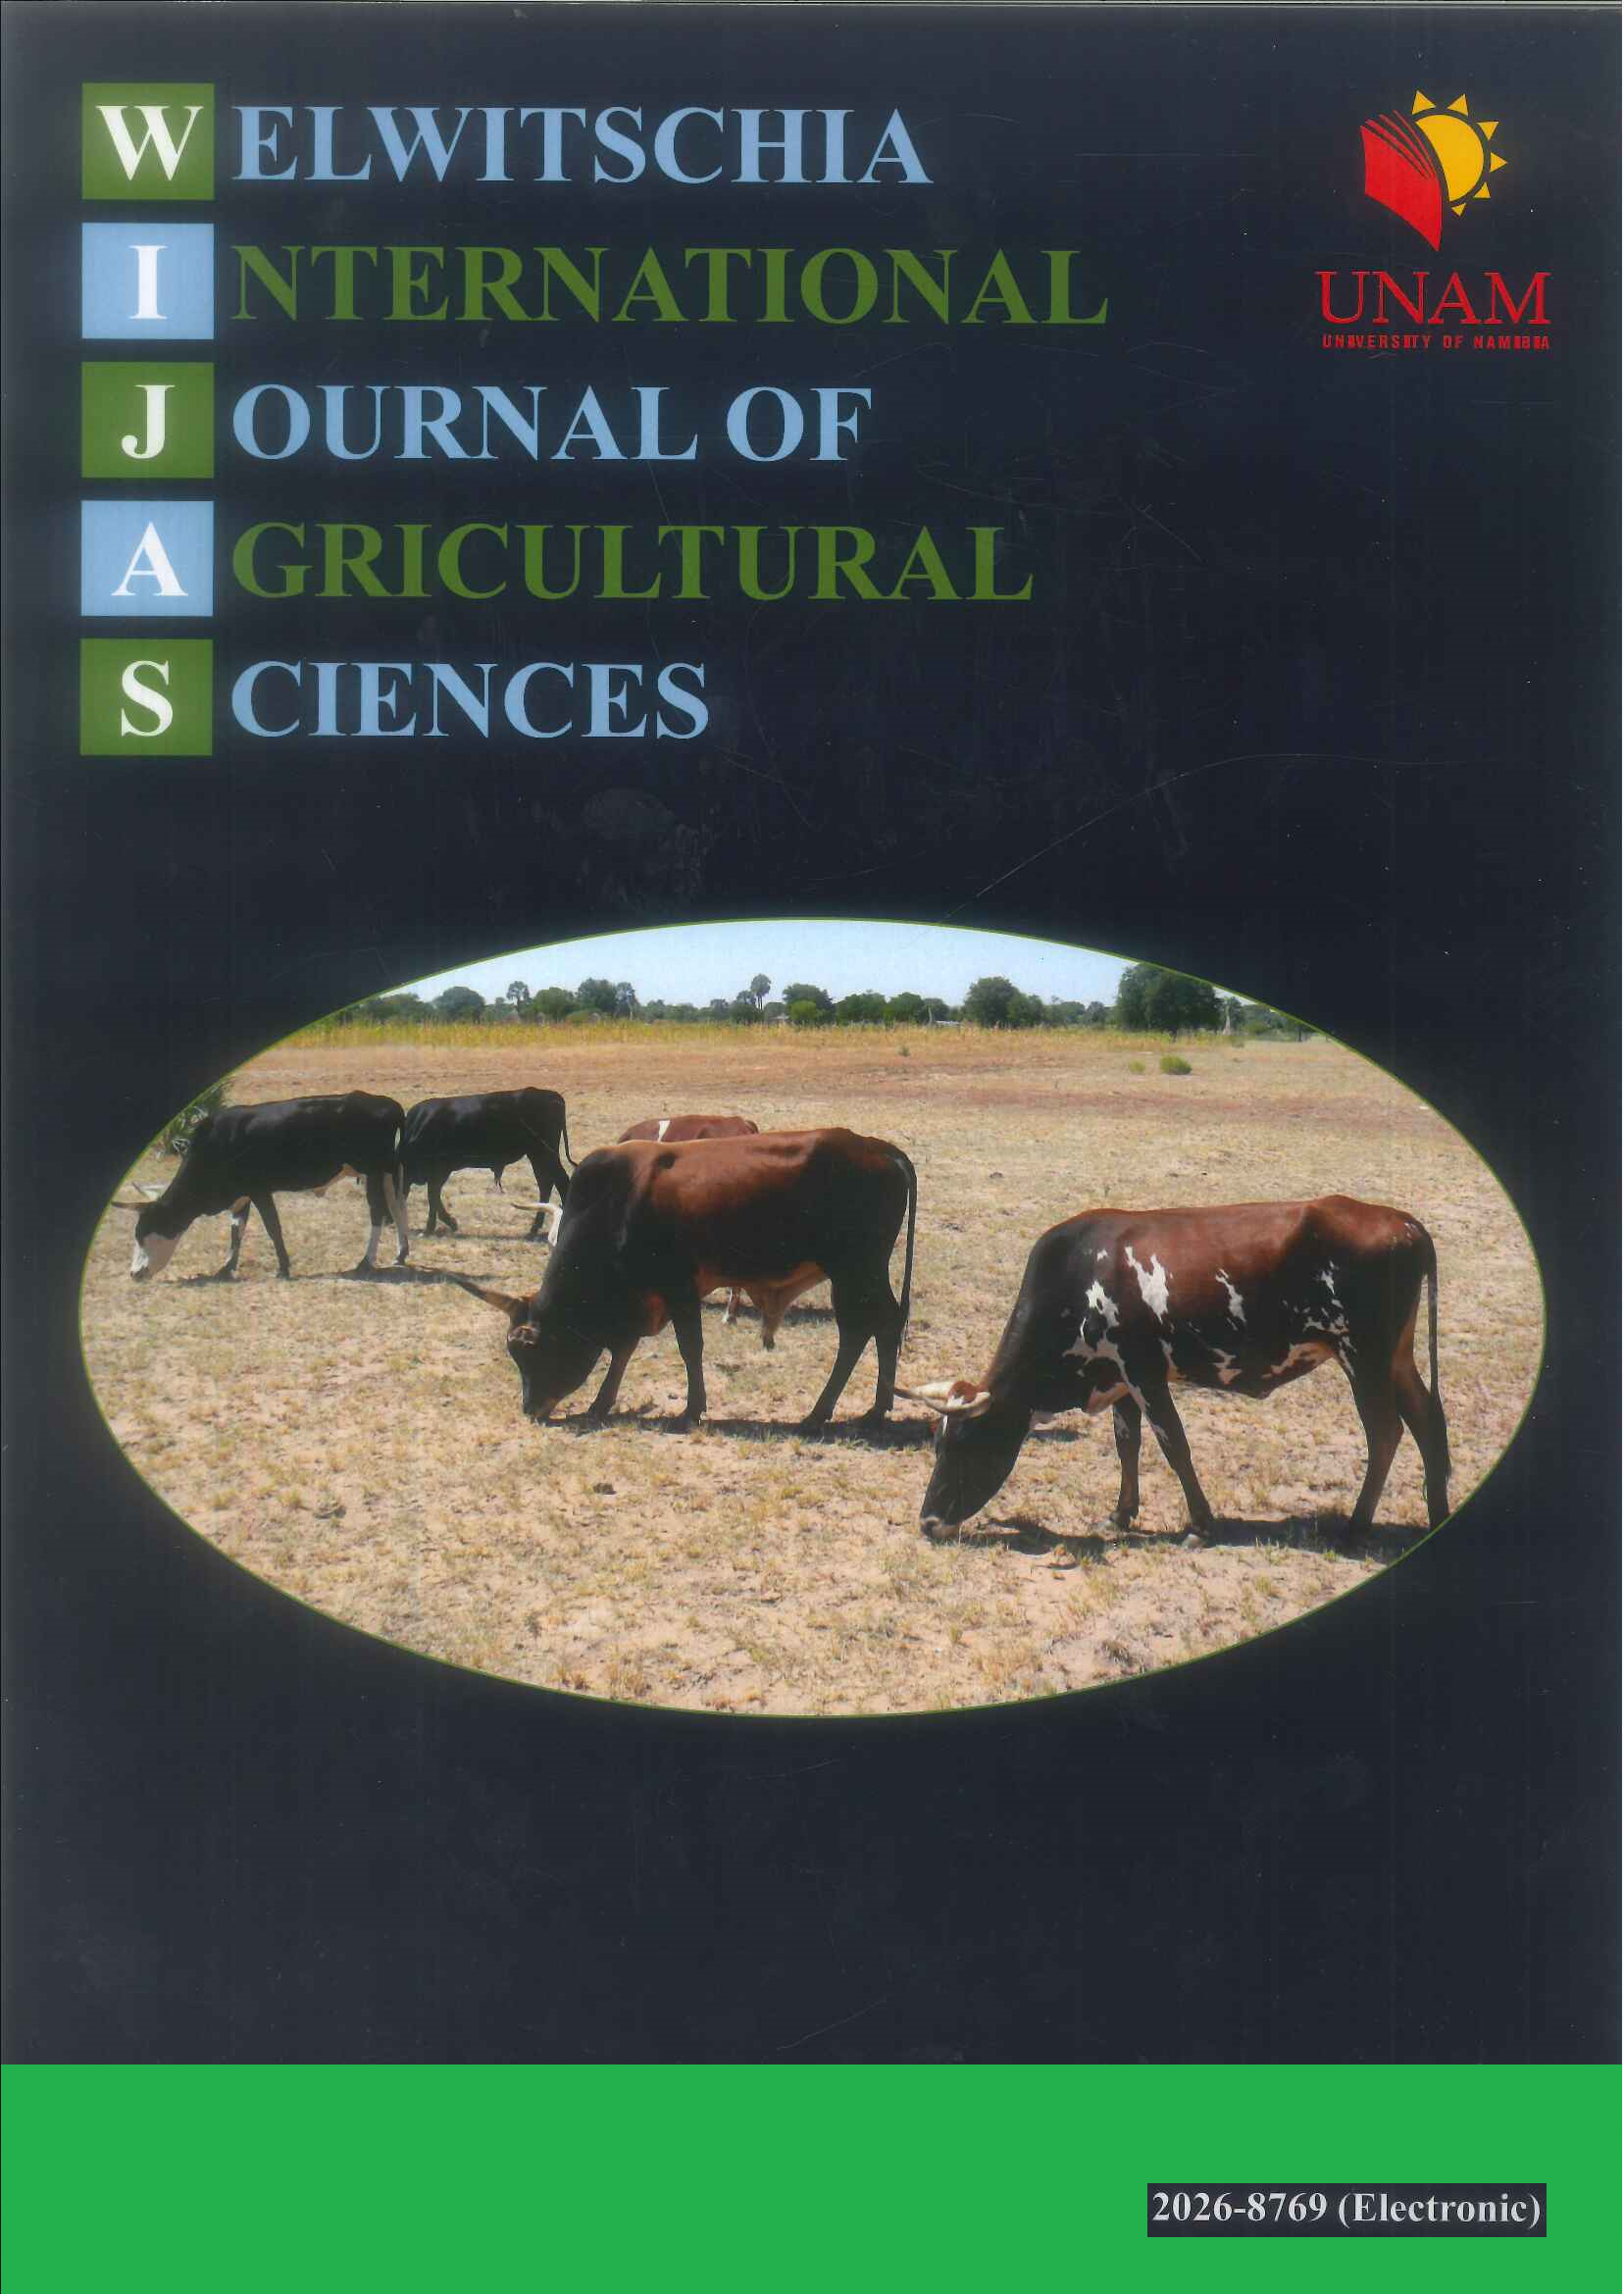 					View Vol. 3 No. 1 (2022): Welwitschia International Journal of Agricultural Sciences
				